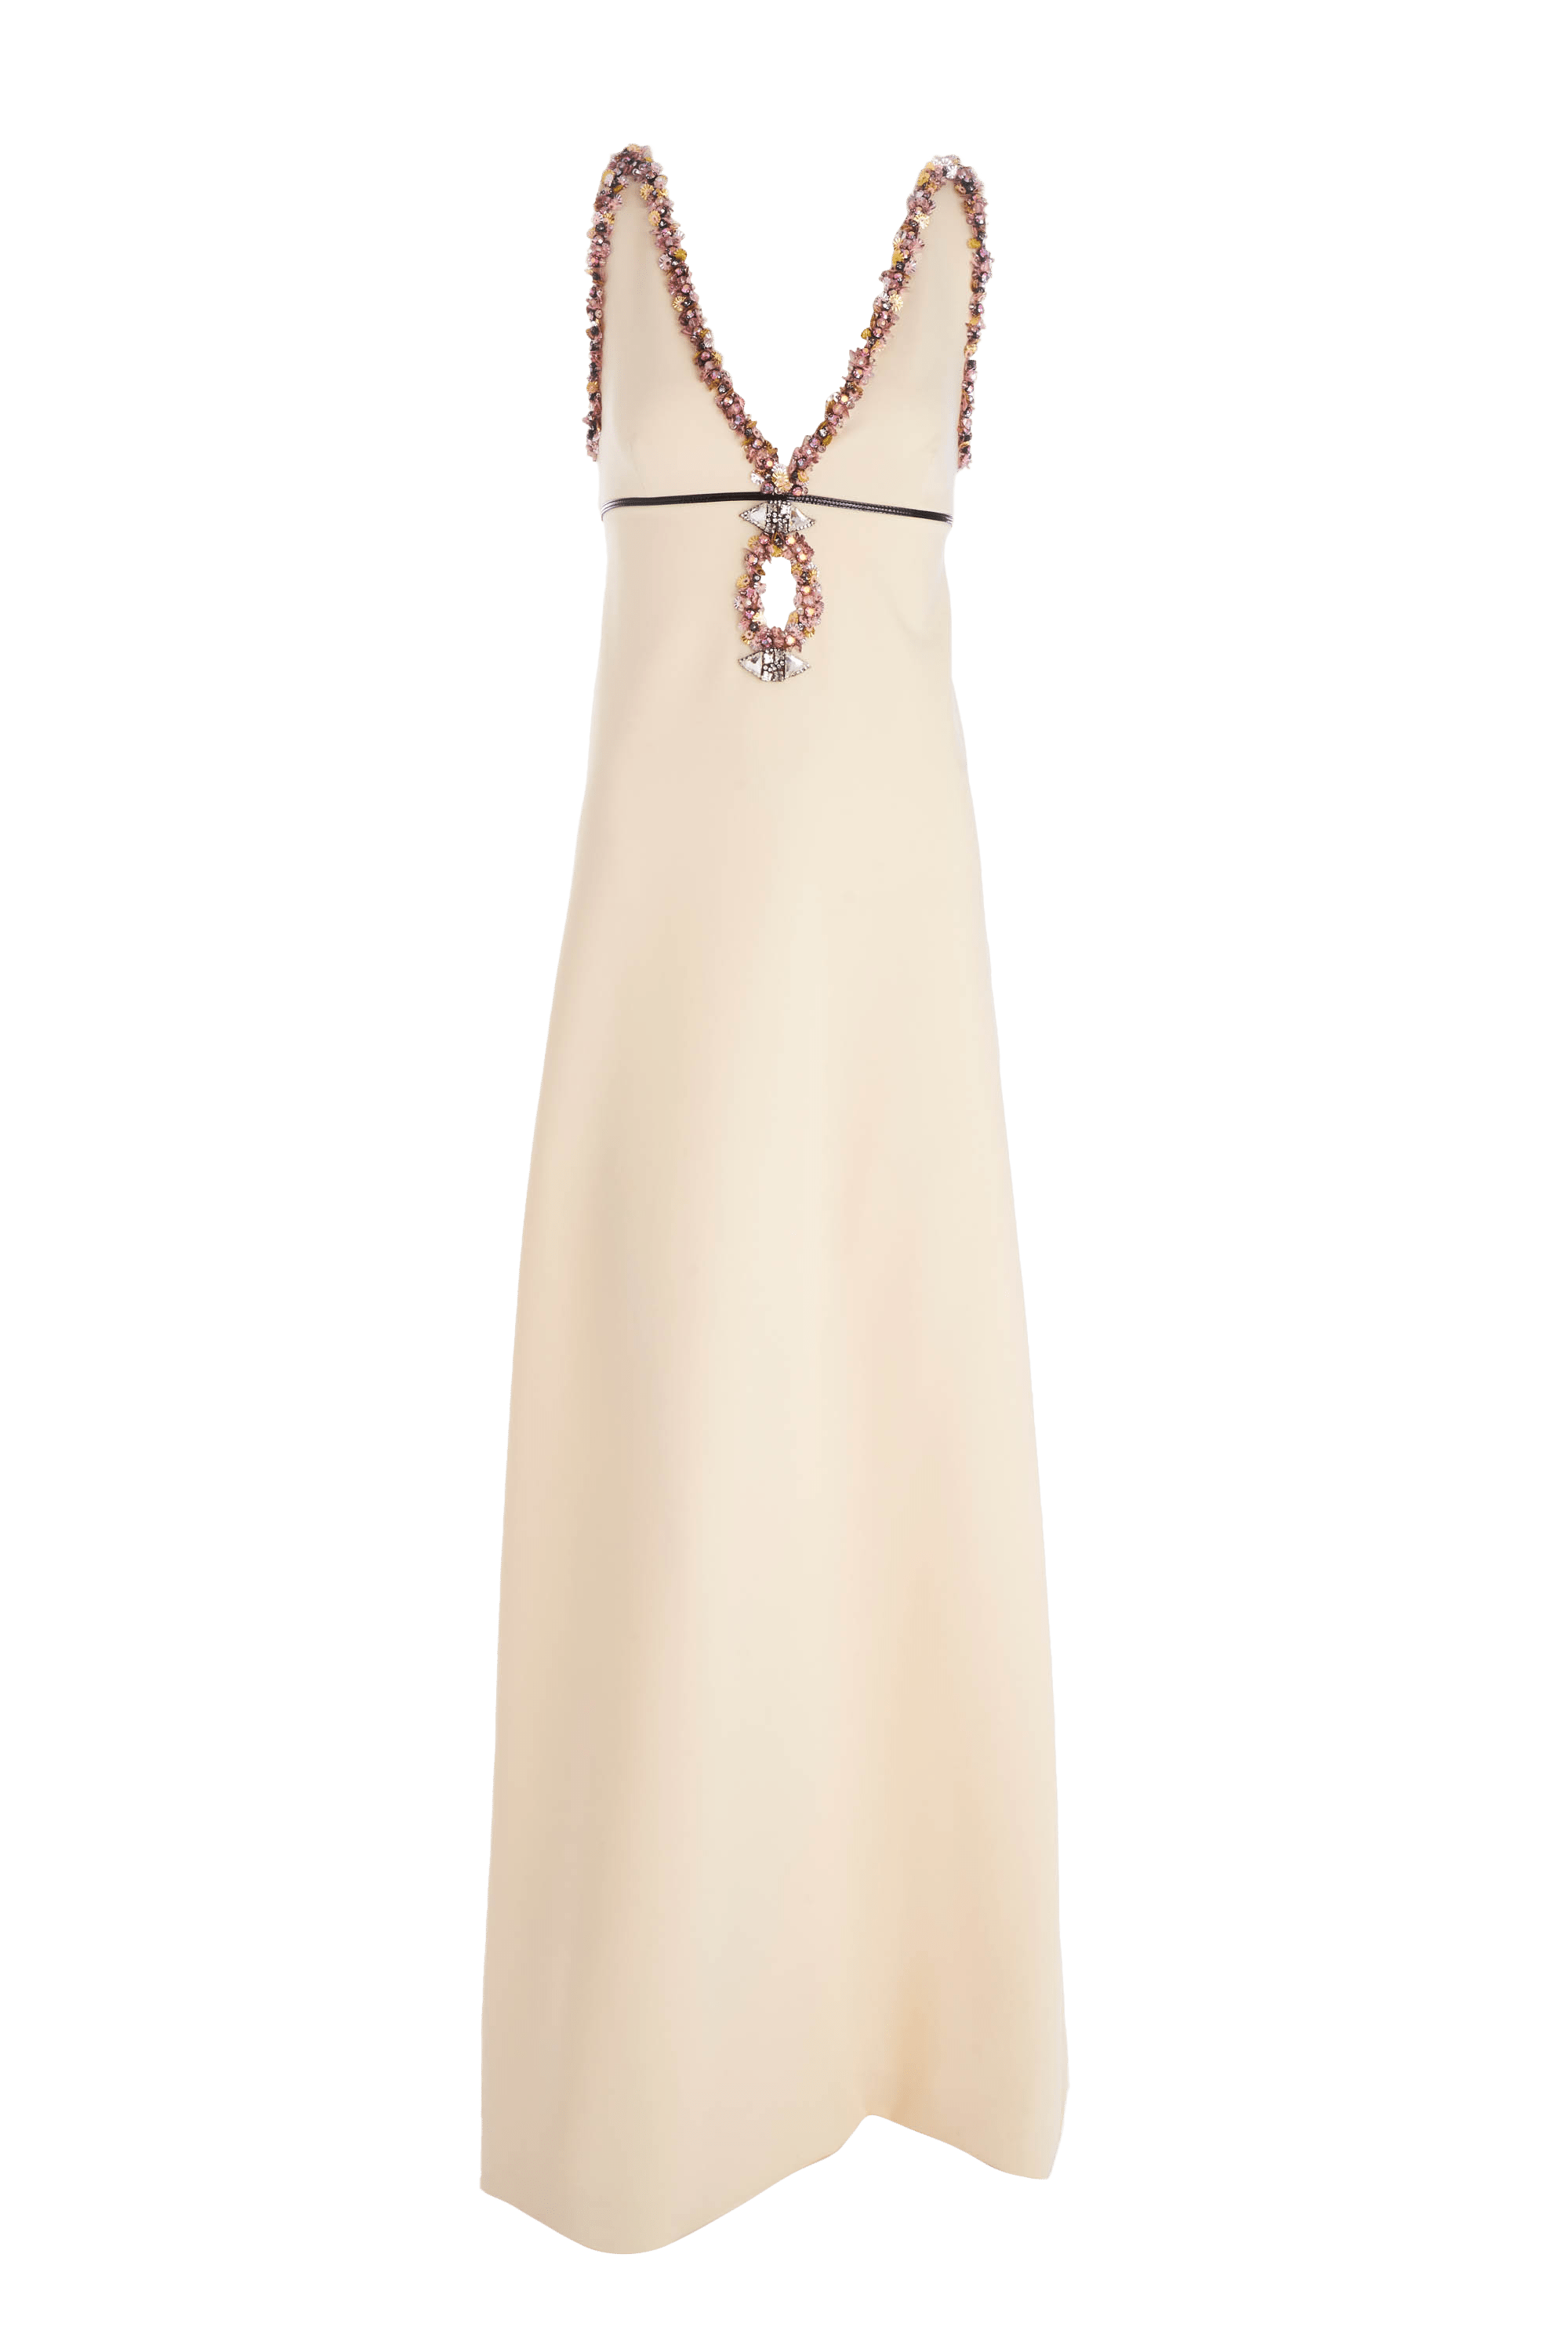 Gucci Cream V-Neckline Gown with Floral Sequins